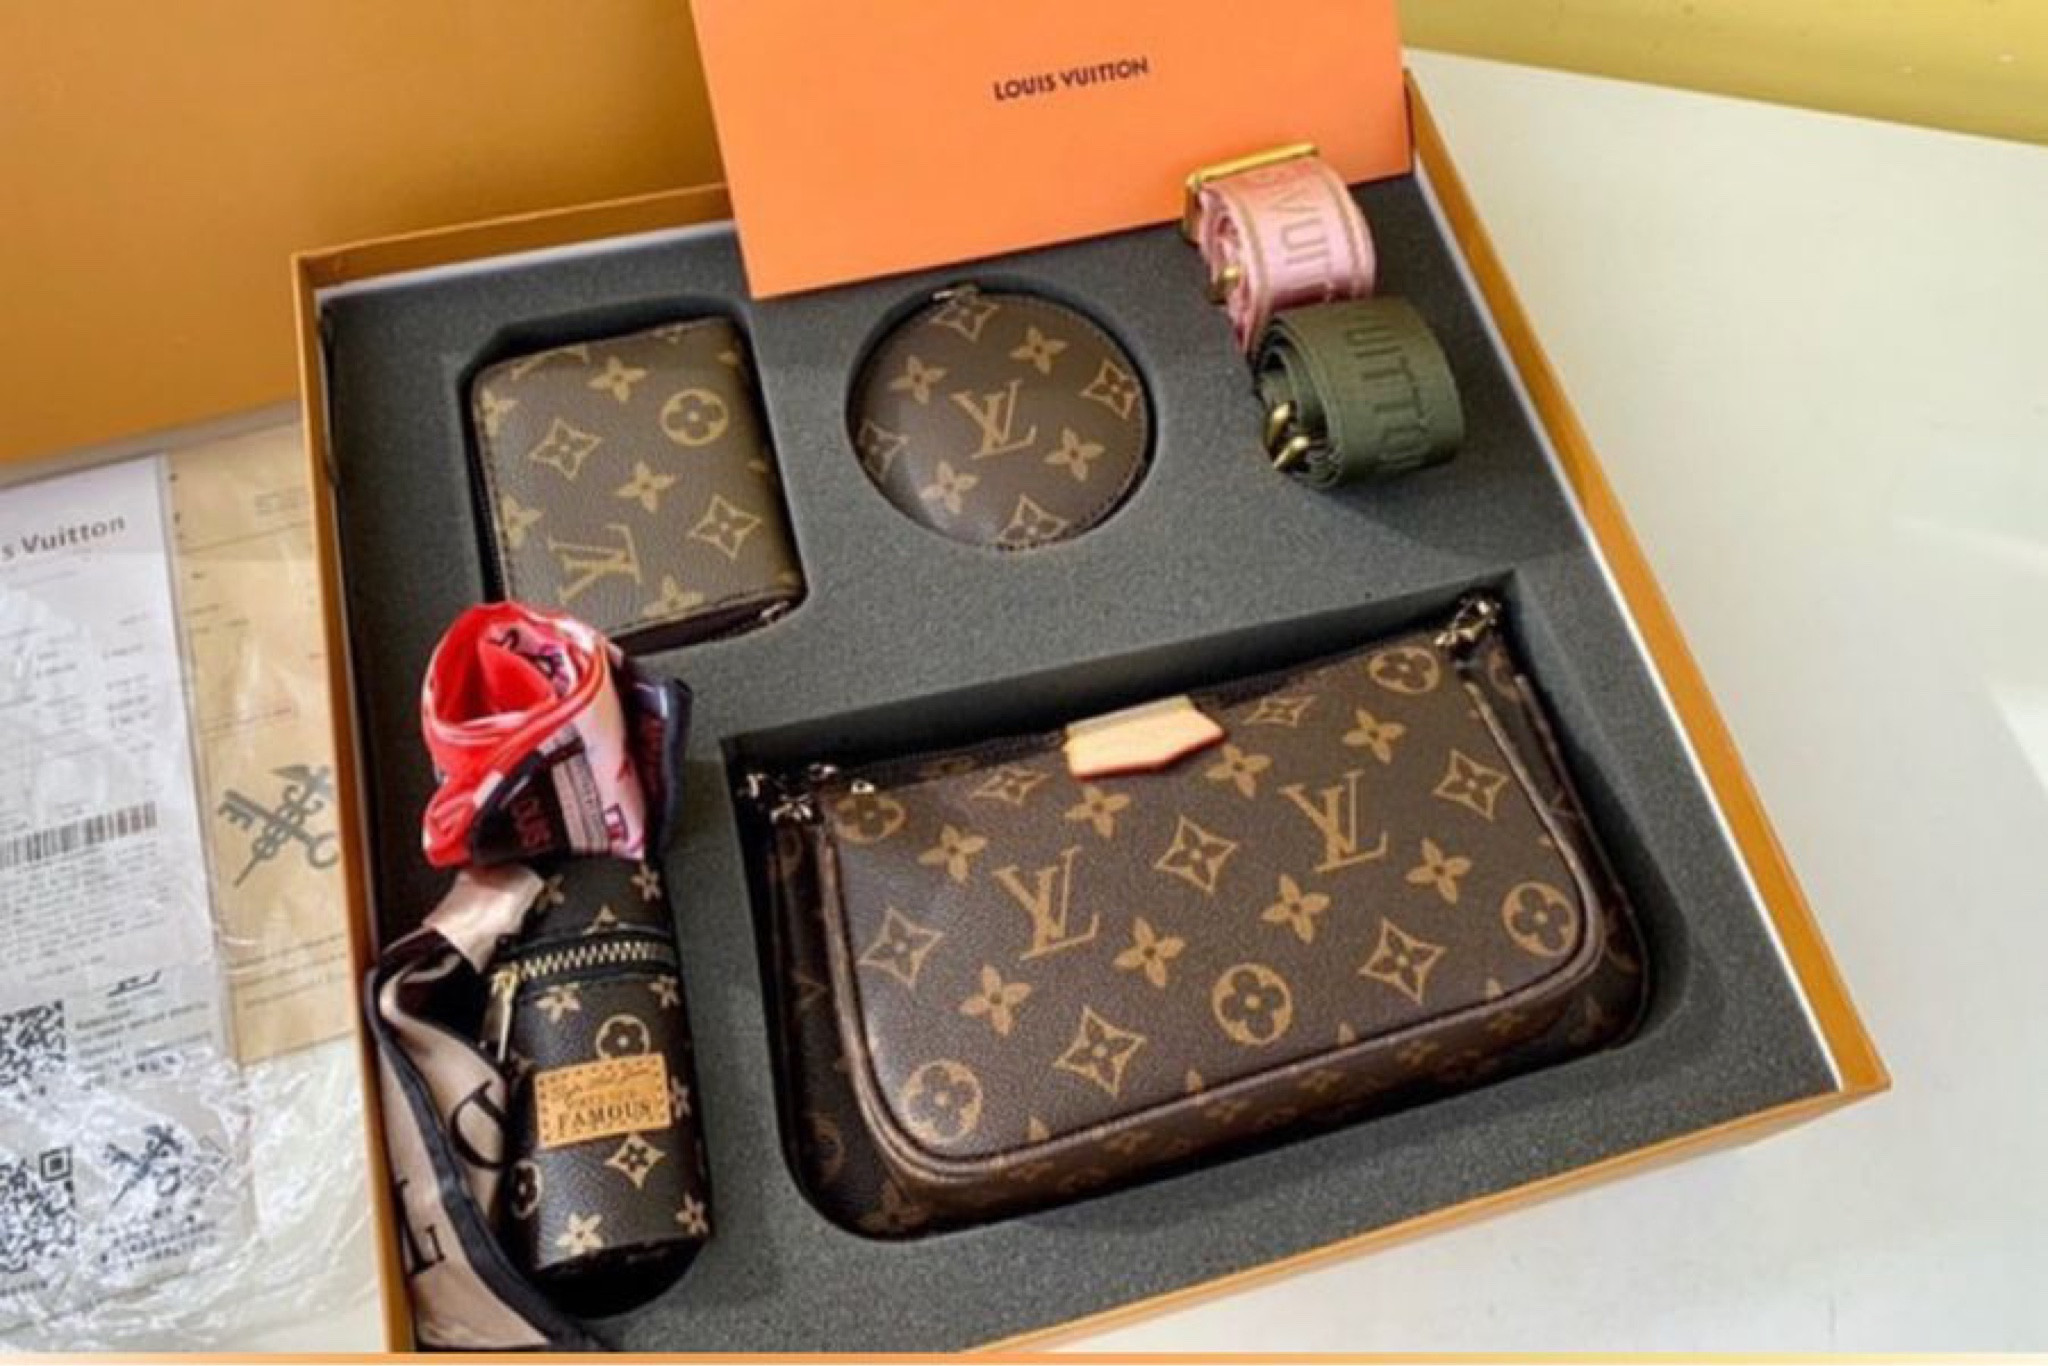 LV DHGATE HAUL (with links)! I CANT BELIEVE THIS! GREAT FINDS ON